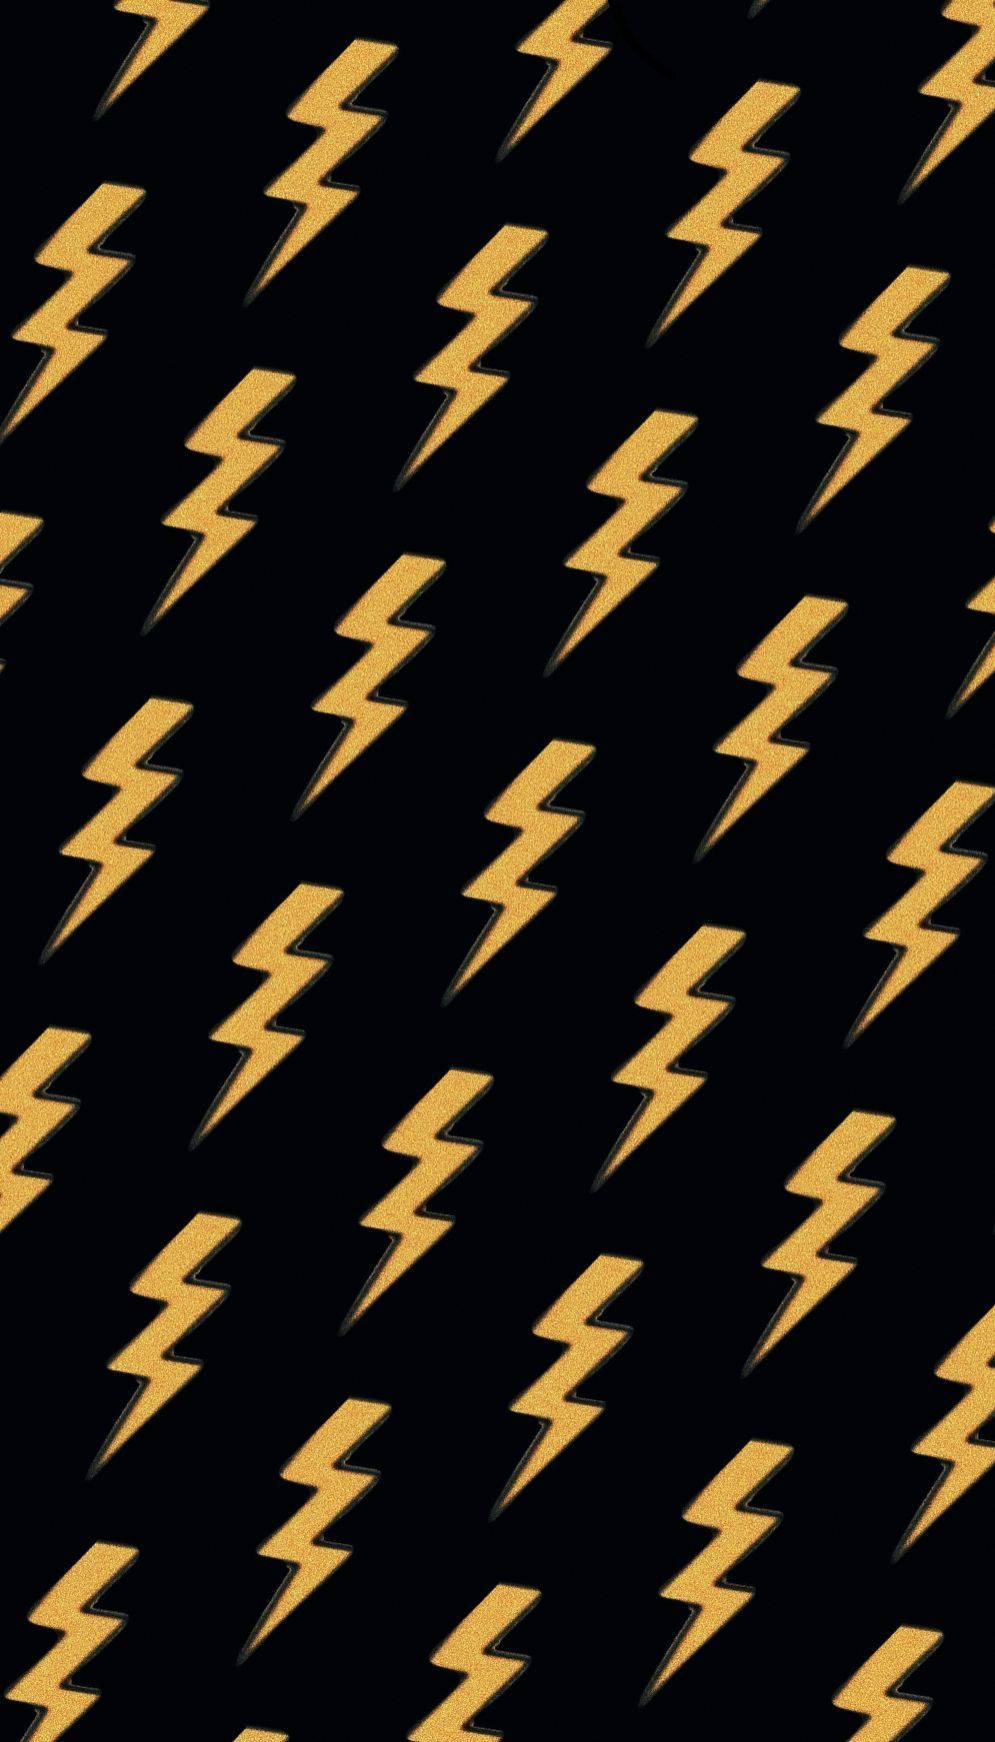 3D Lightning Bolts Wallpaper  Picture collage wall Artsy background  Bedroom wall collage